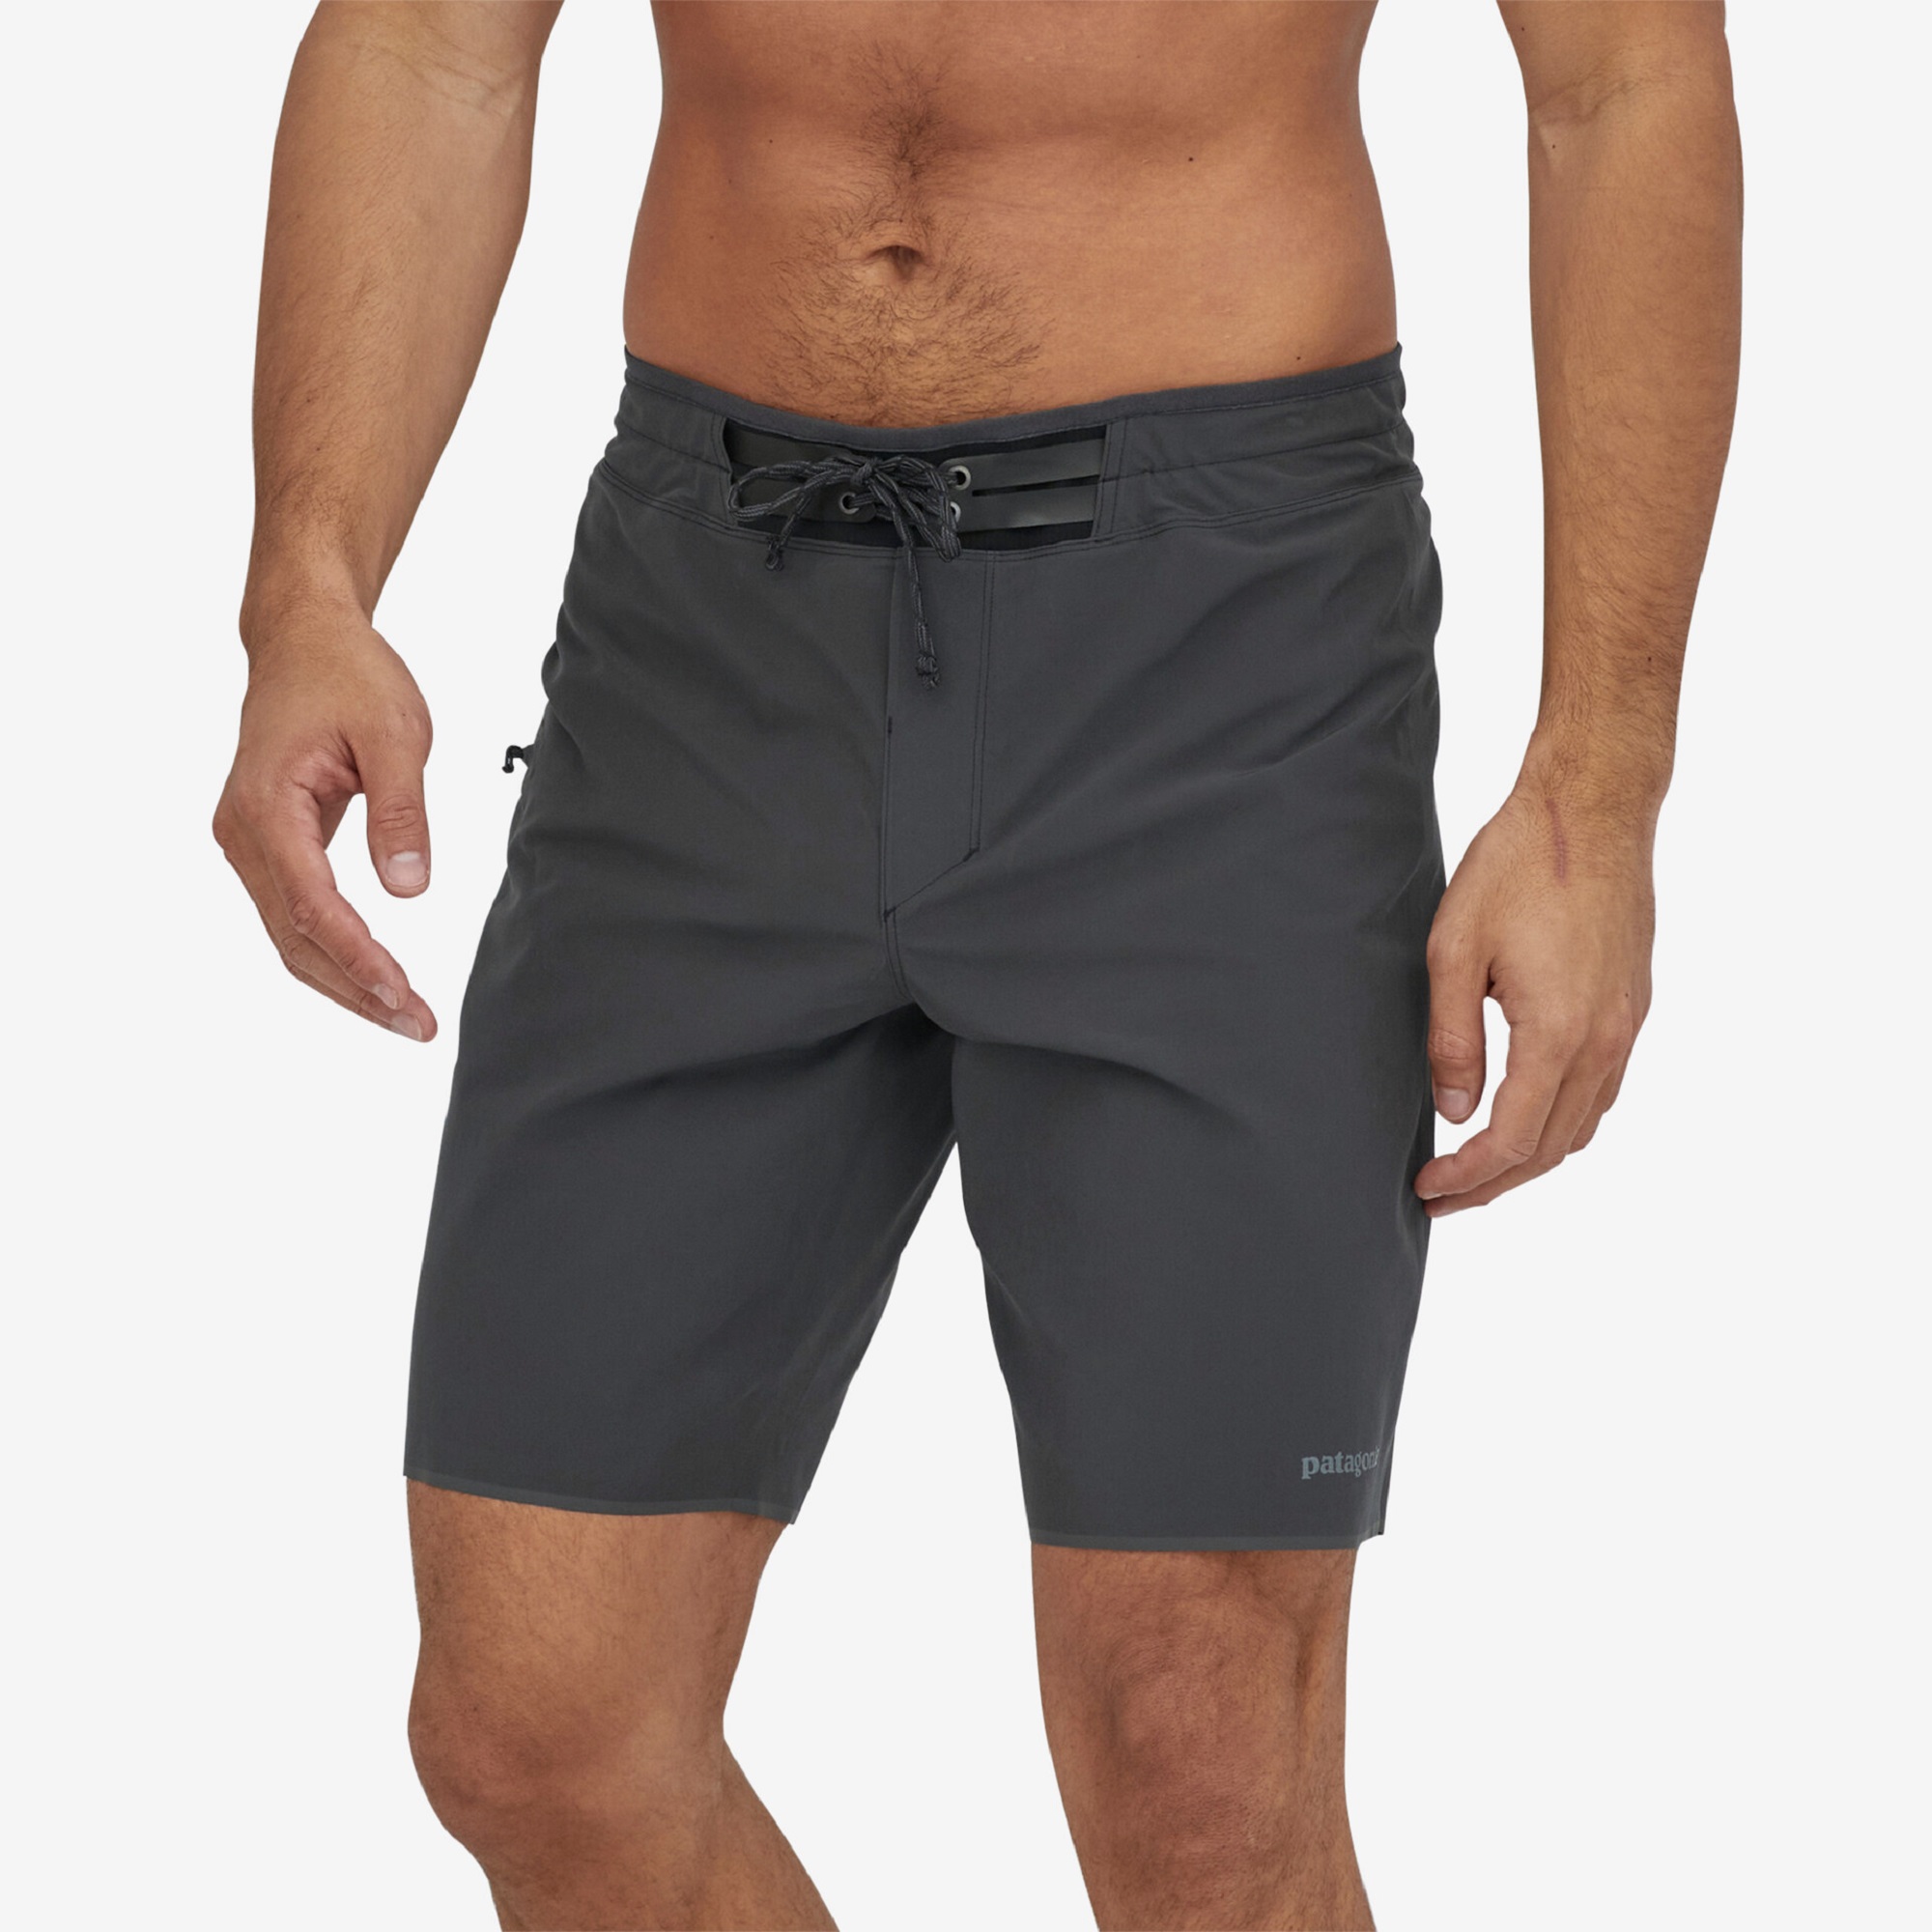 Patagonia board shorts on a model